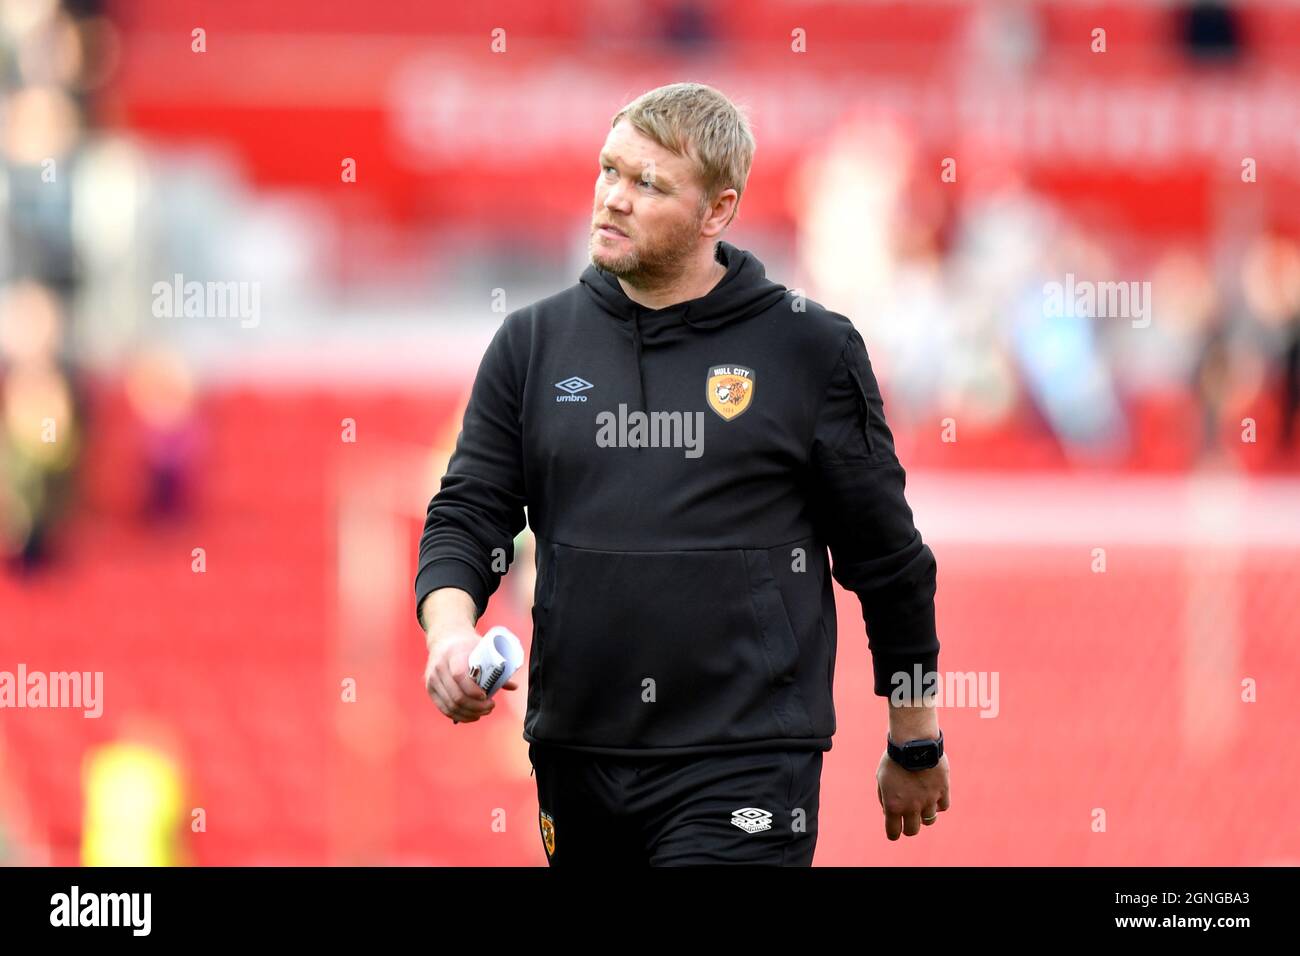 Hull City manager Grant McCann after the final whistle during the Sky Bet Championship match at the bet365 Stadium, Stoke. Picture date: Saturday September 25, 2021. Stock Photo